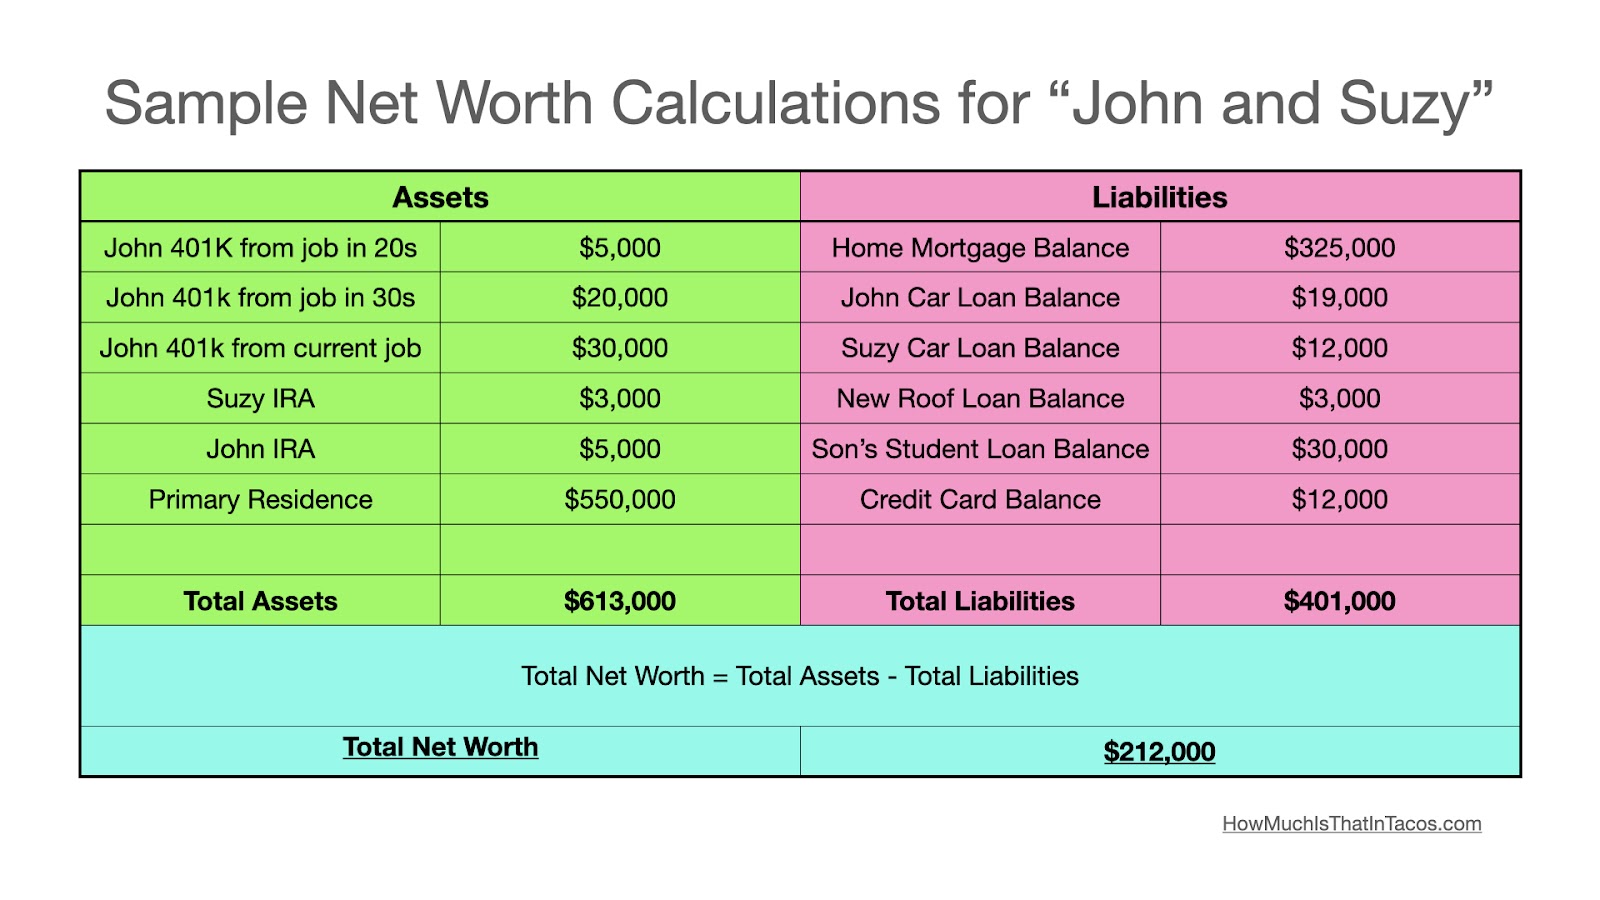 Sample Net Worth Calculations for "John and Suzy"